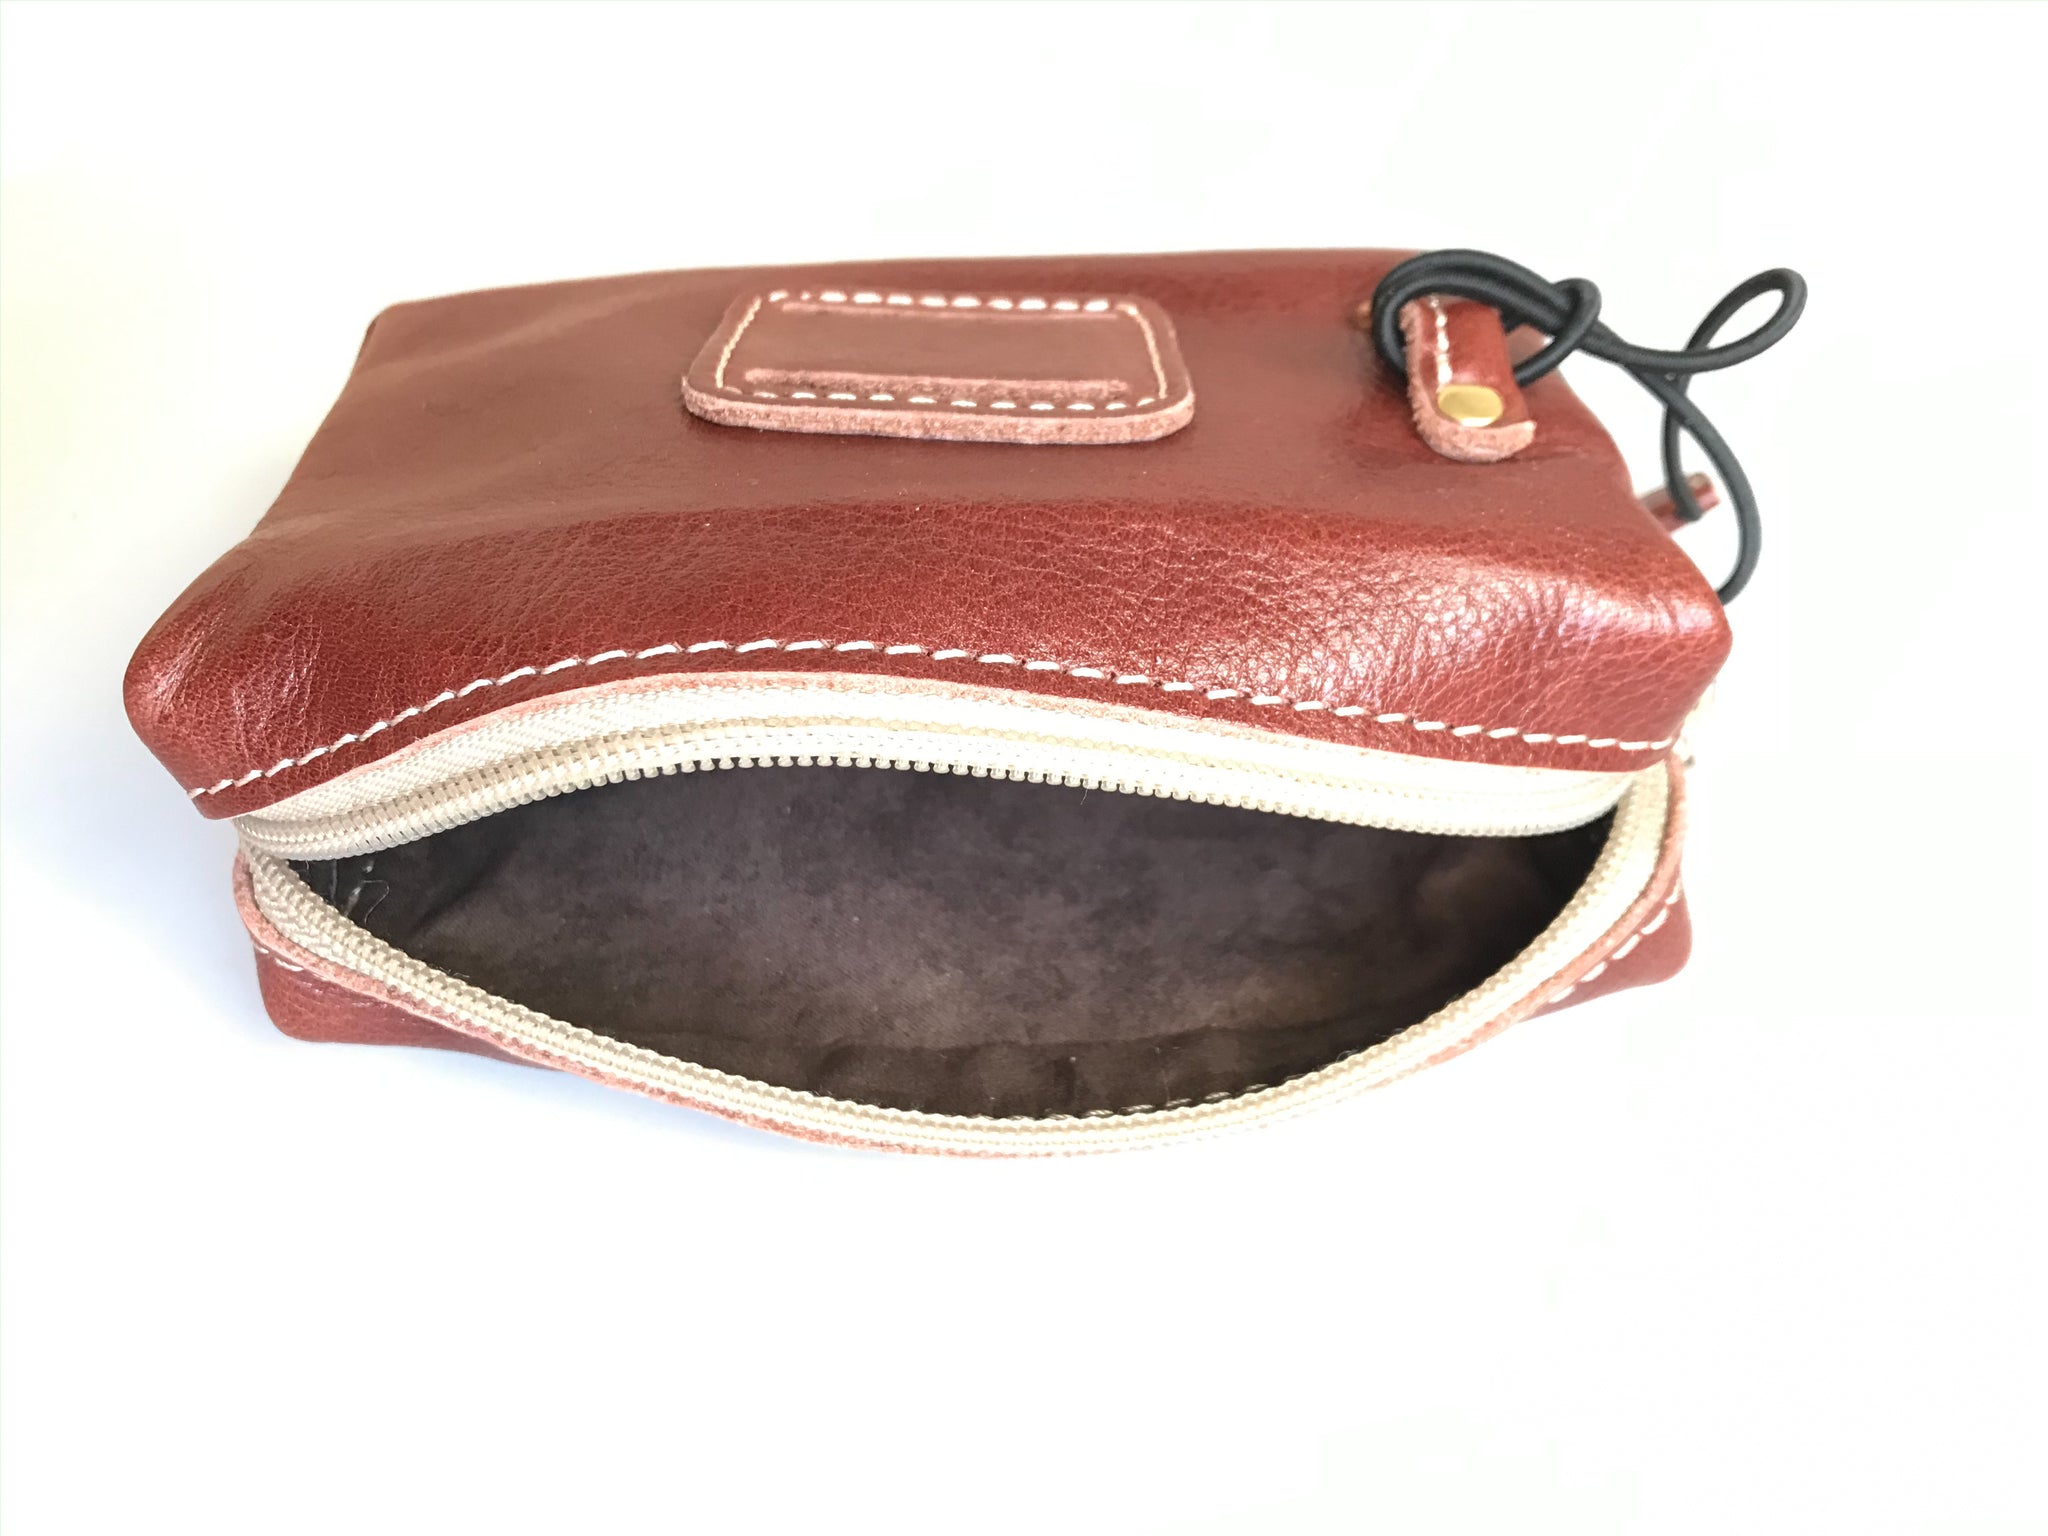 Leather Bag Accessories, Cowhide Bag Accessories